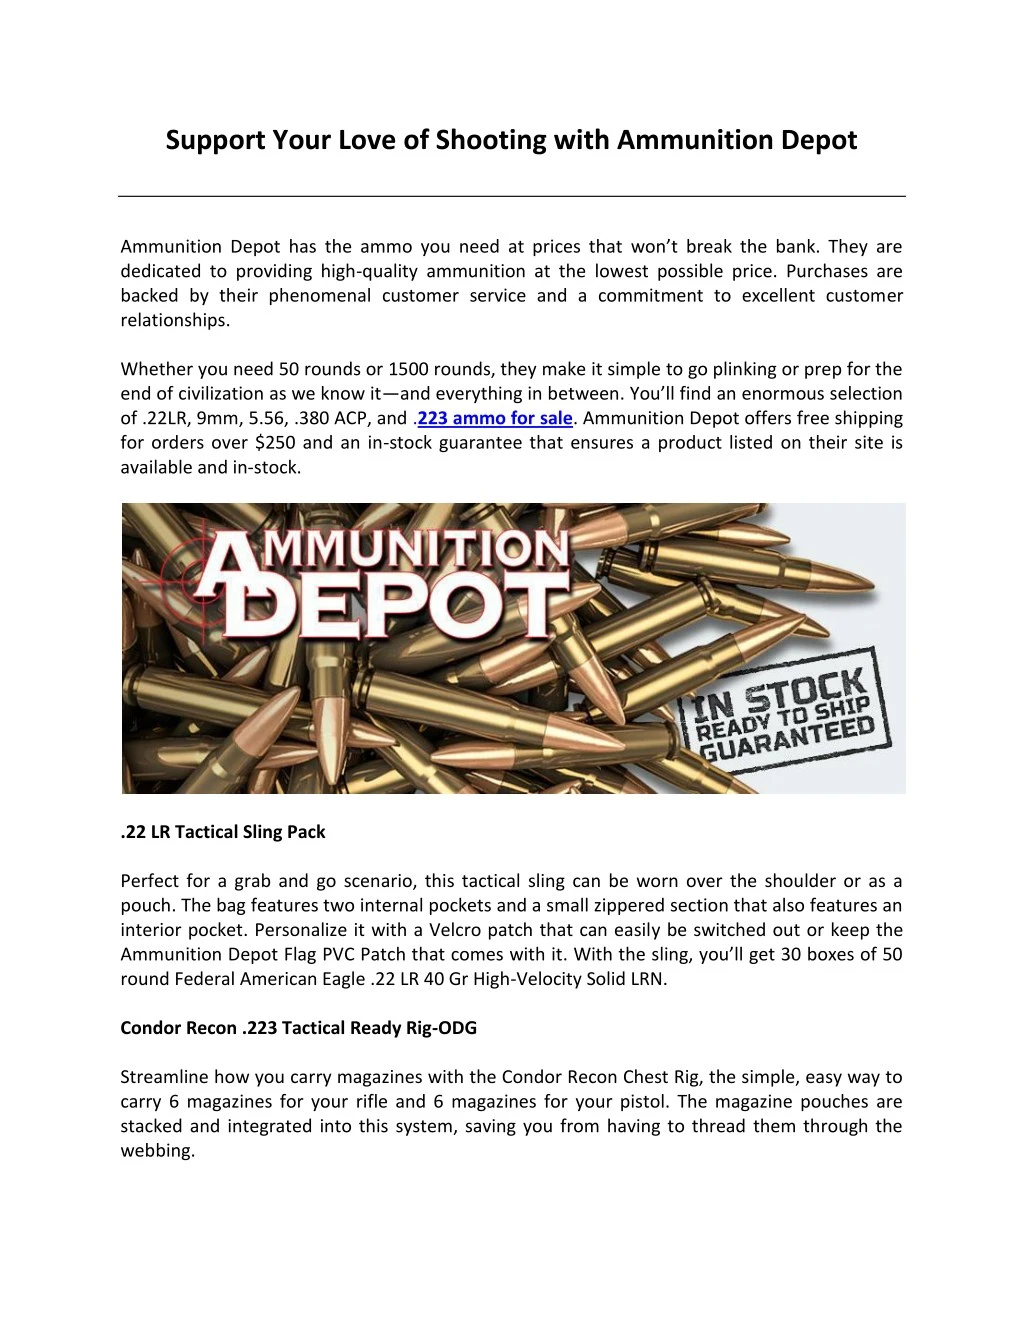 support your love of shooting with ammunition